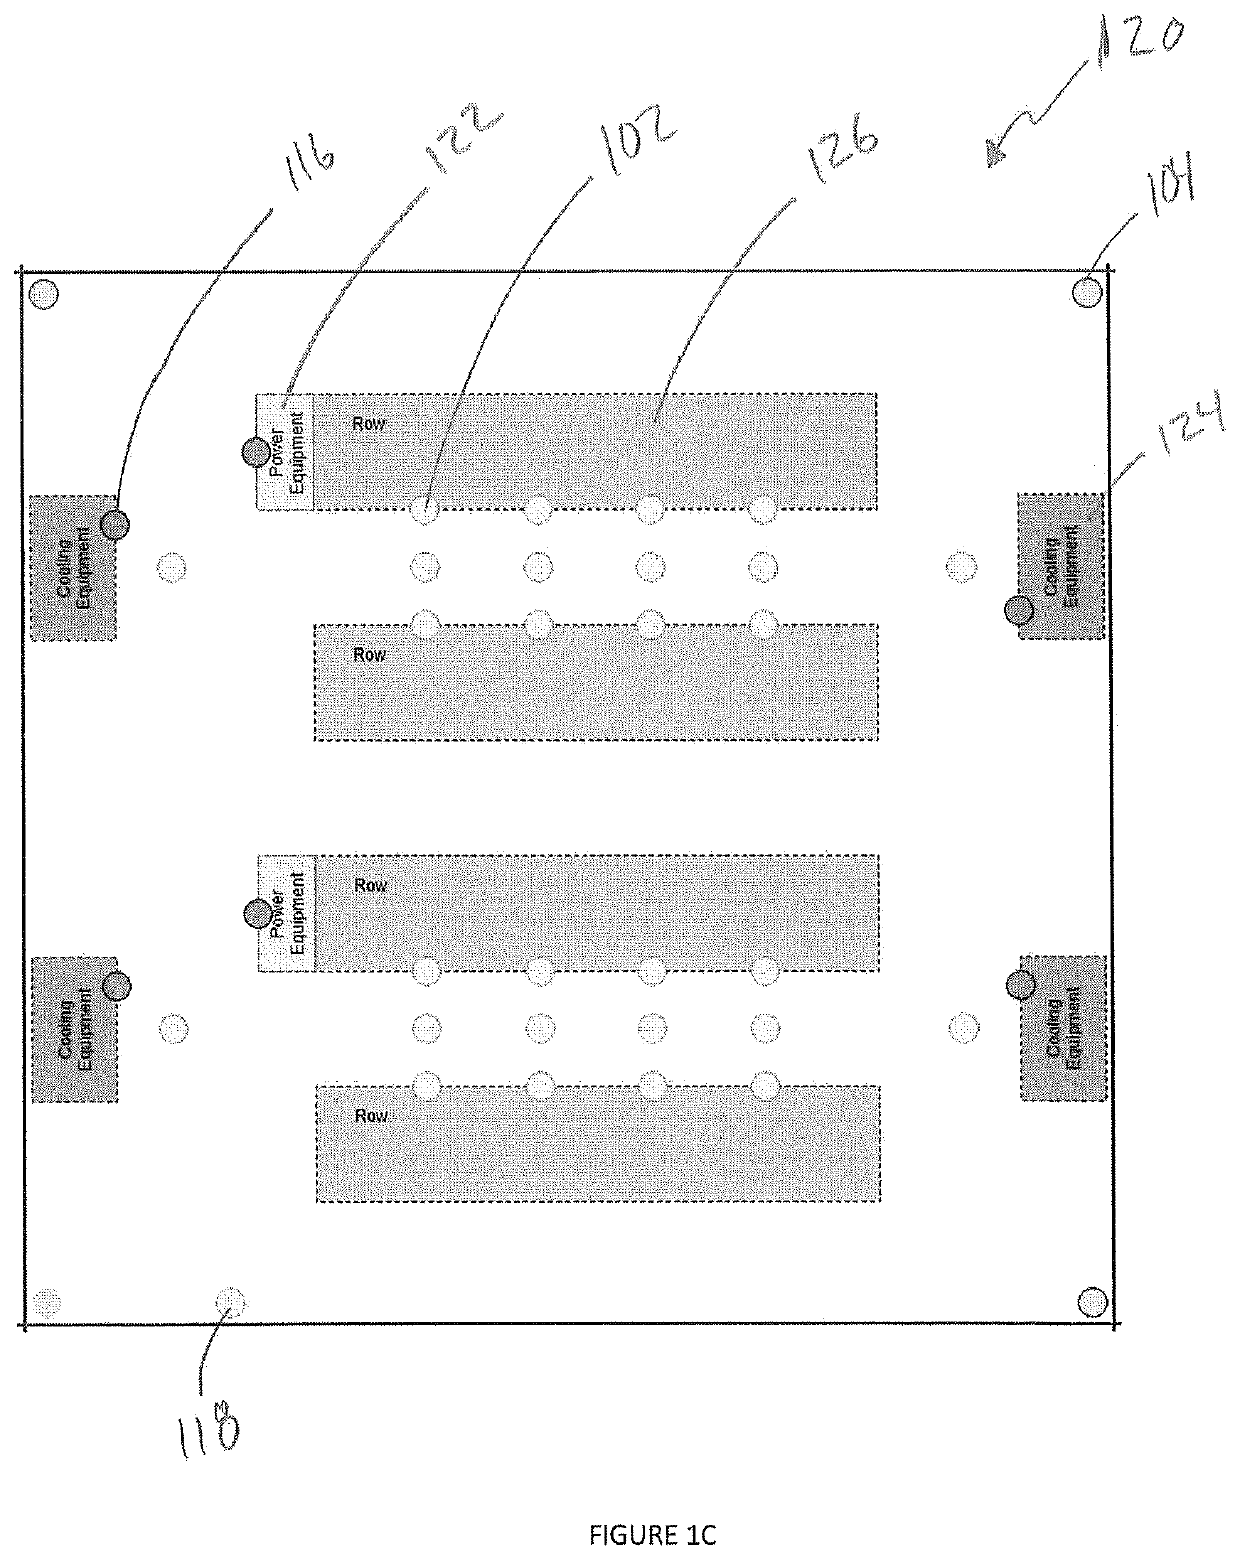 Systems and methods for sensing, recording, analyzing and reporting environmental conditions in data centers and similar facilities